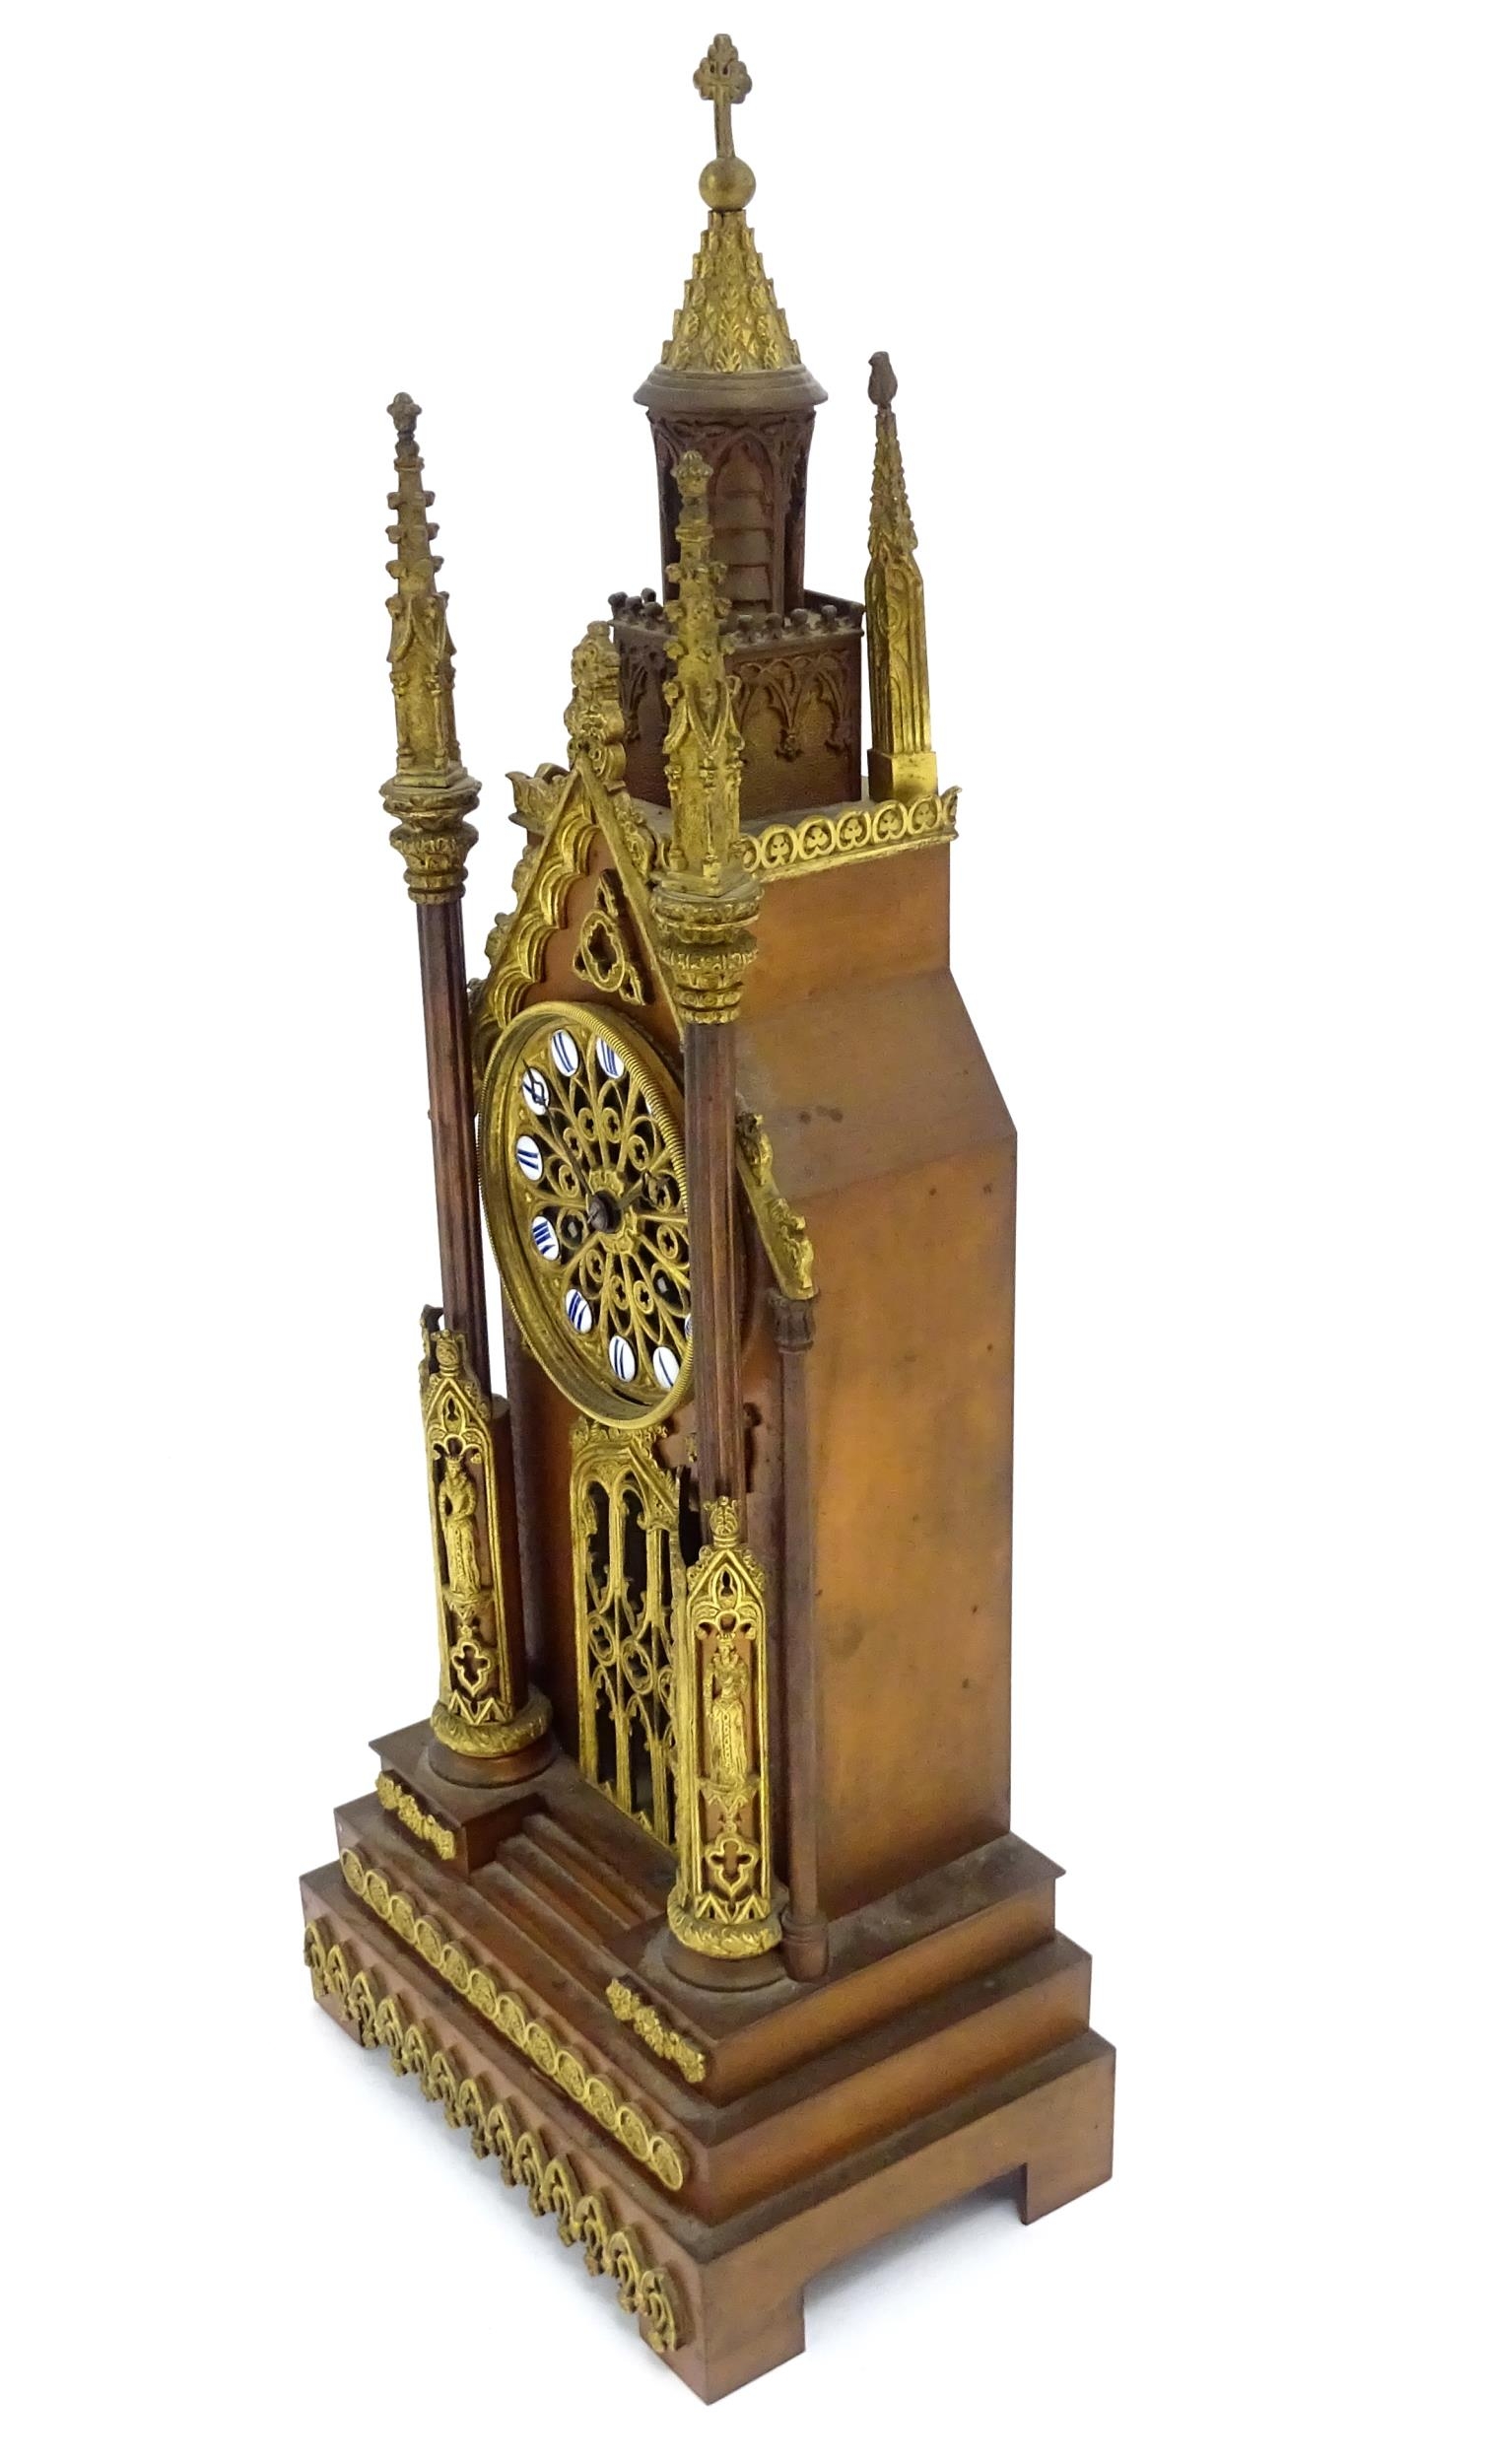 A French cathedral clock of gothic architectural design with ormolu mounts, having pointed finials - Image 5 of 16